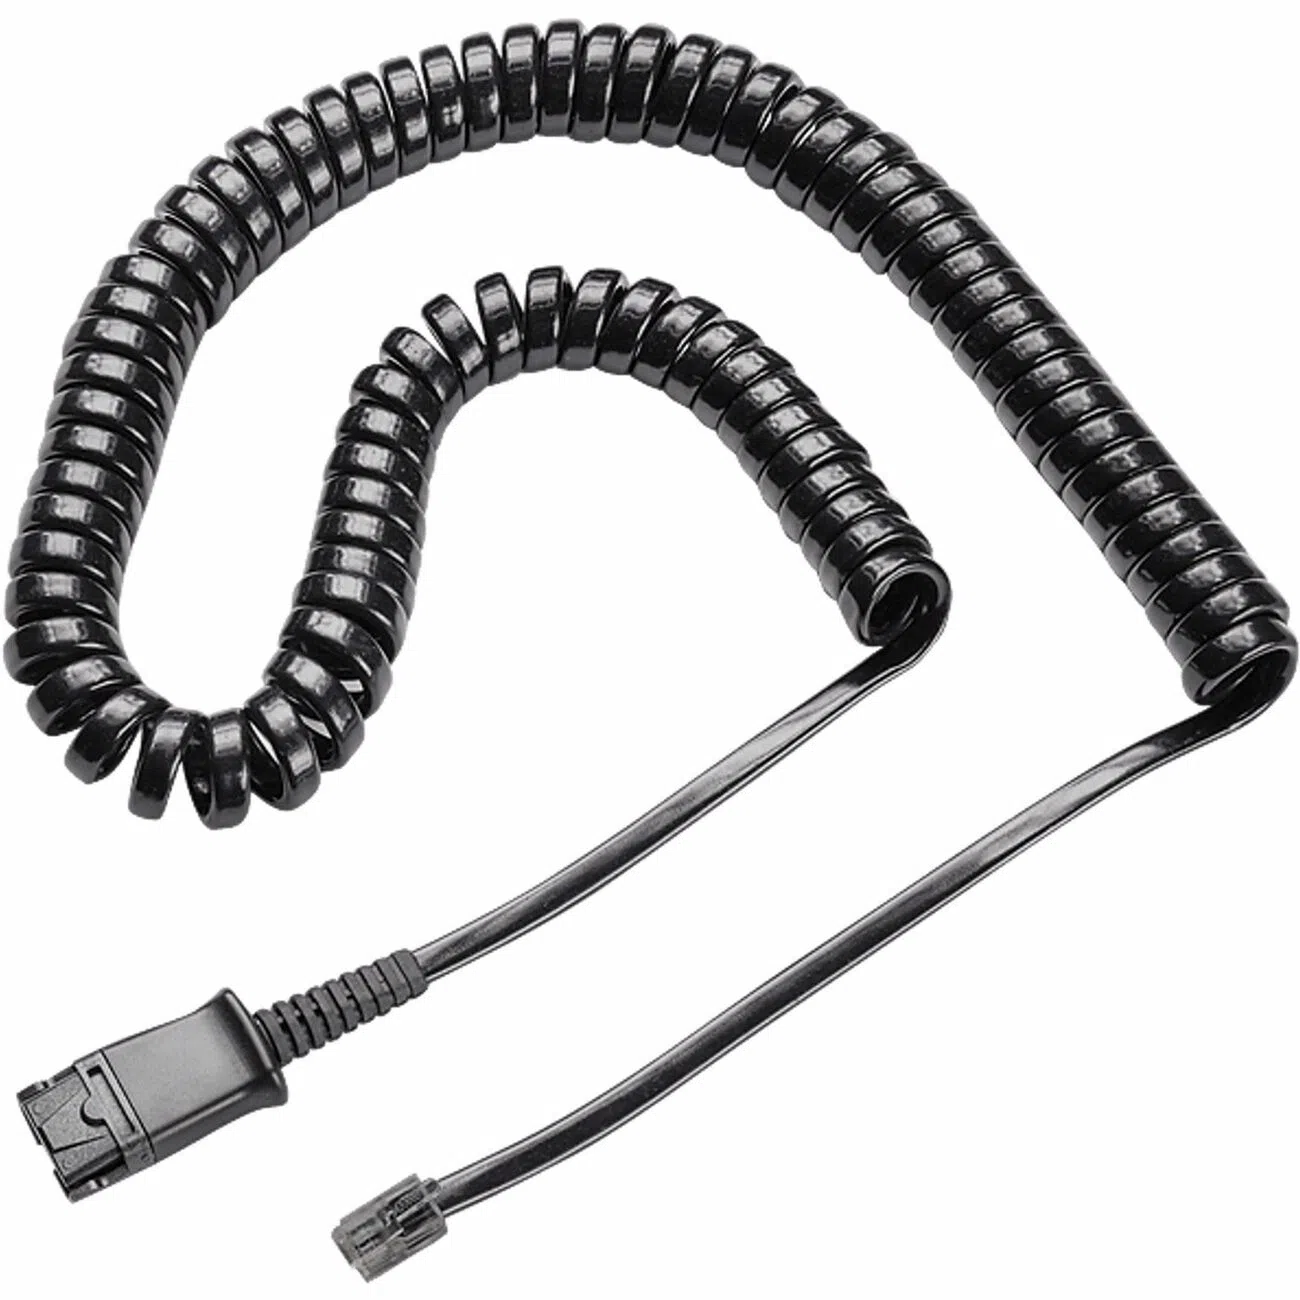 Does the 85R38AA Poly M12 Coil Cable comply with TAA regulations?